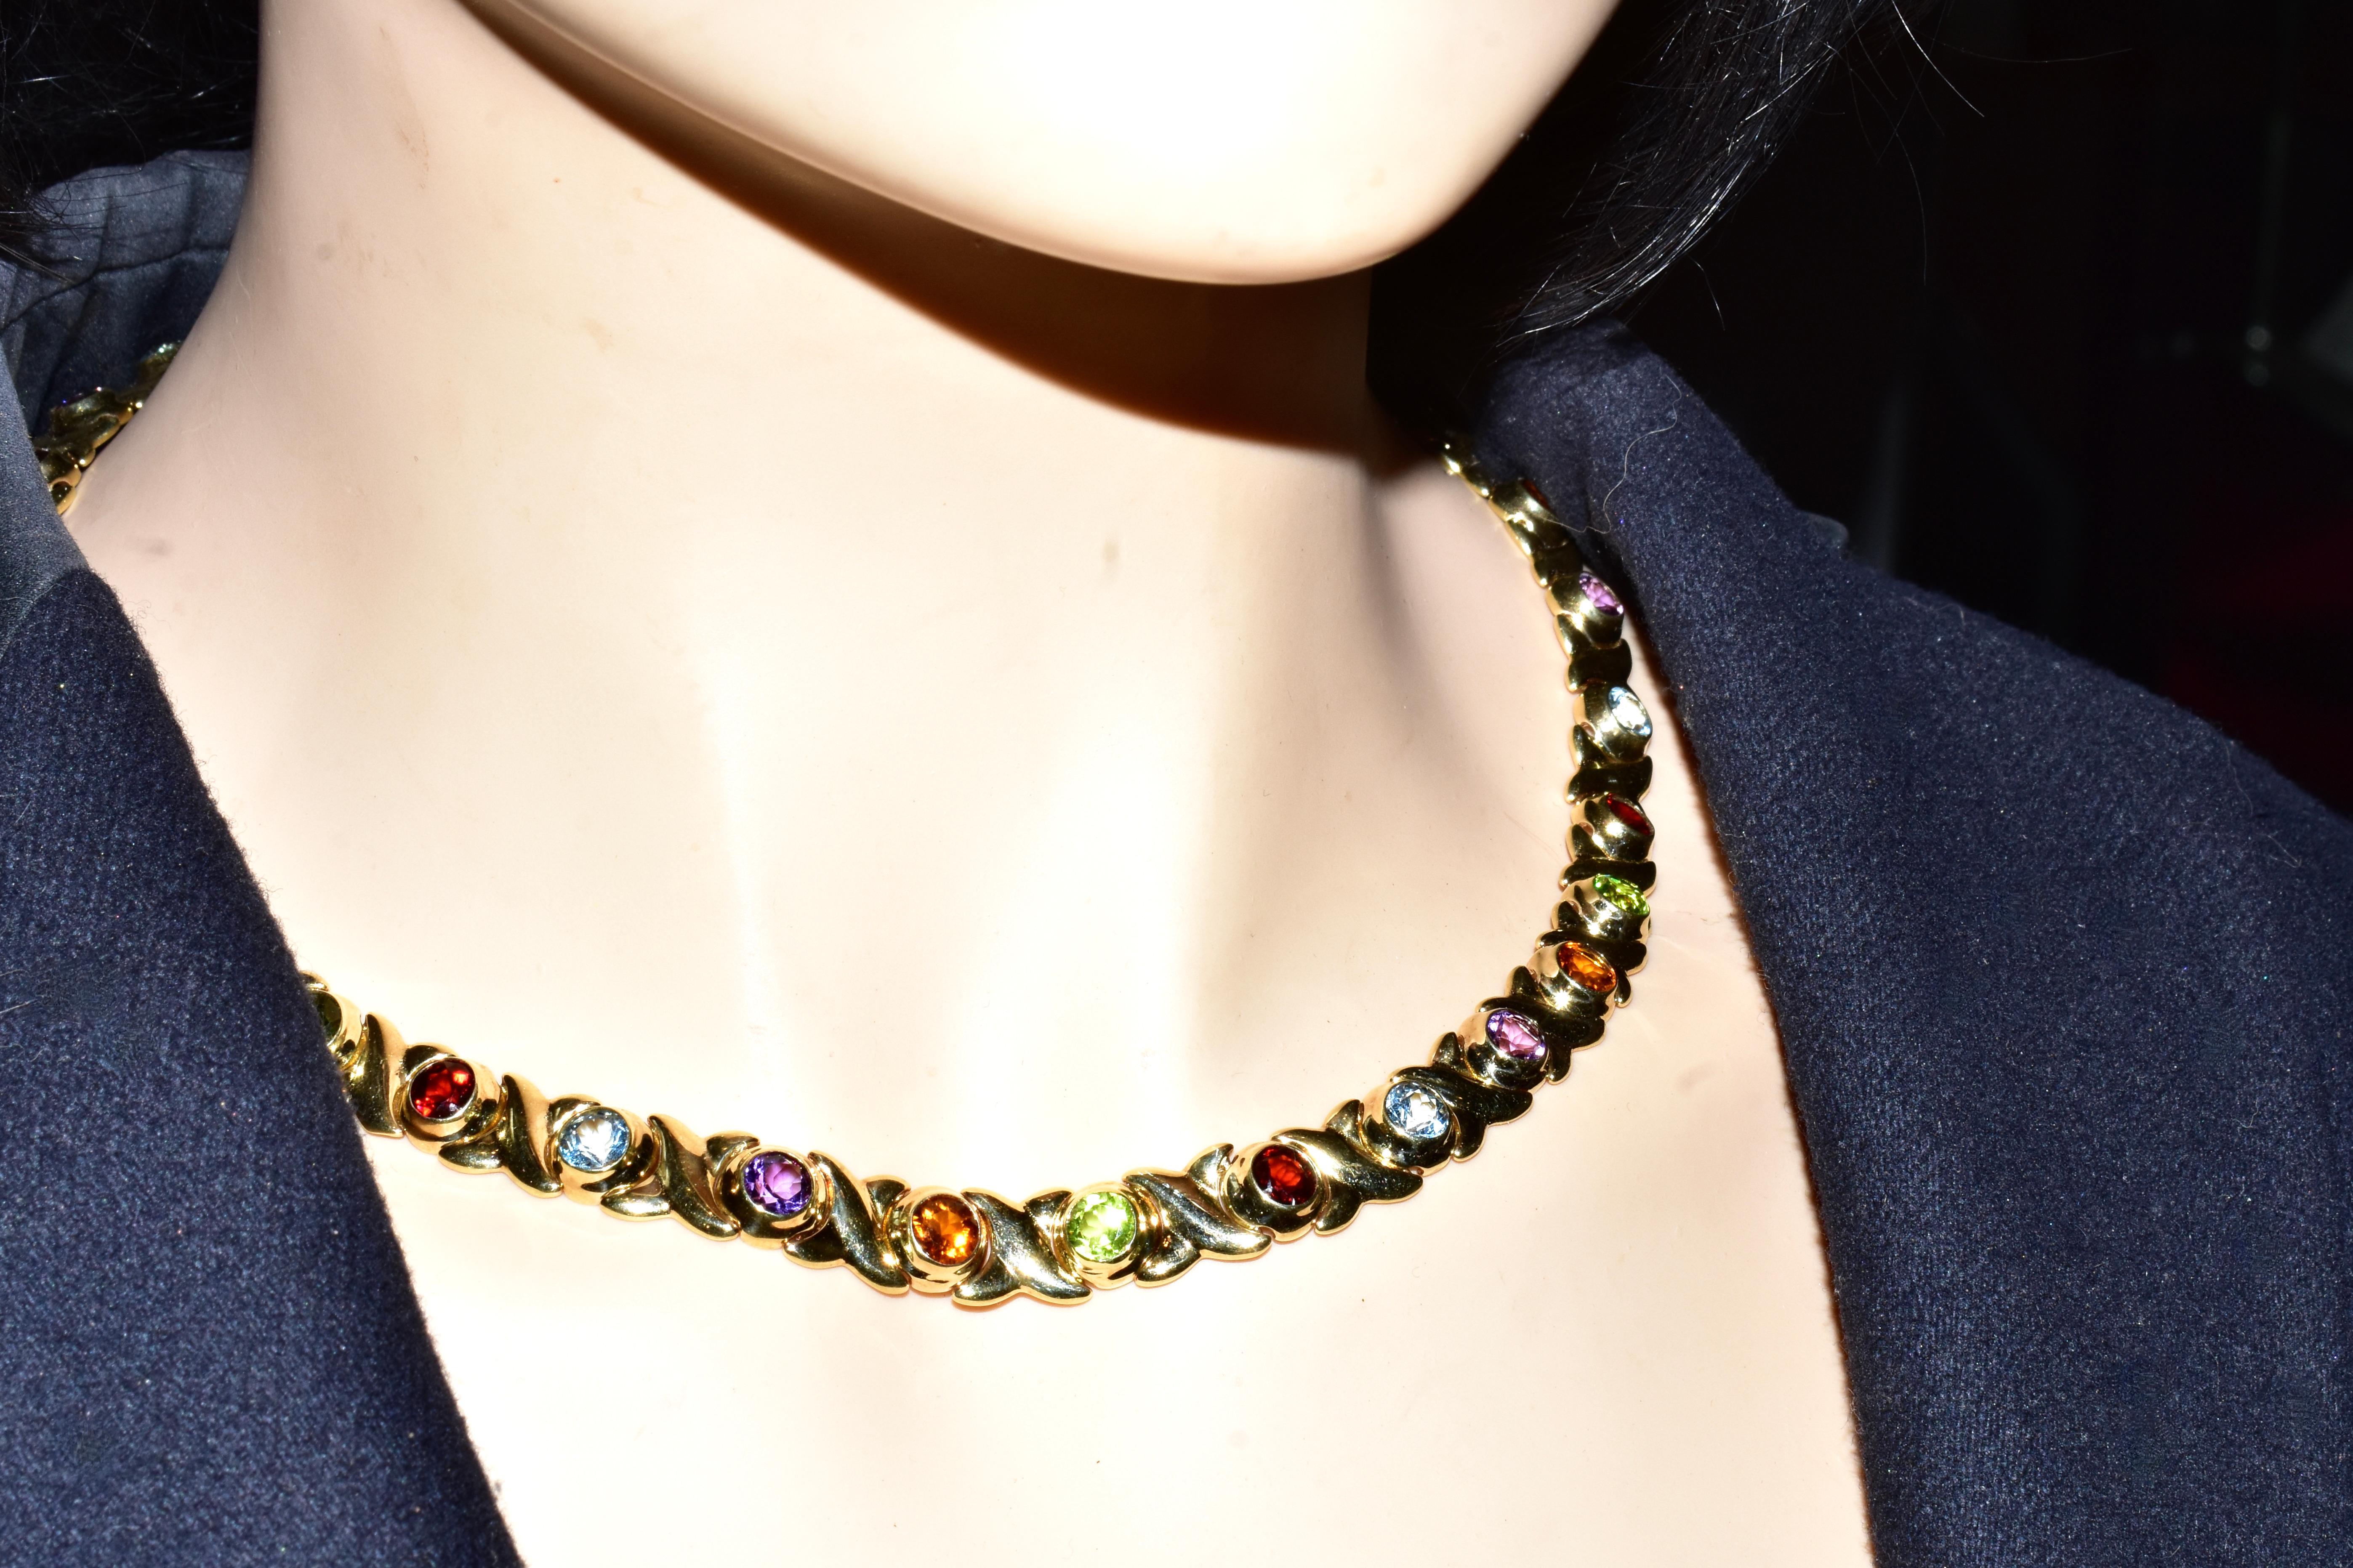 Gem Set Yellow Gold Vintage Necklace with Peridot, Amethyst, Citrine, and Garnet For Sale 4